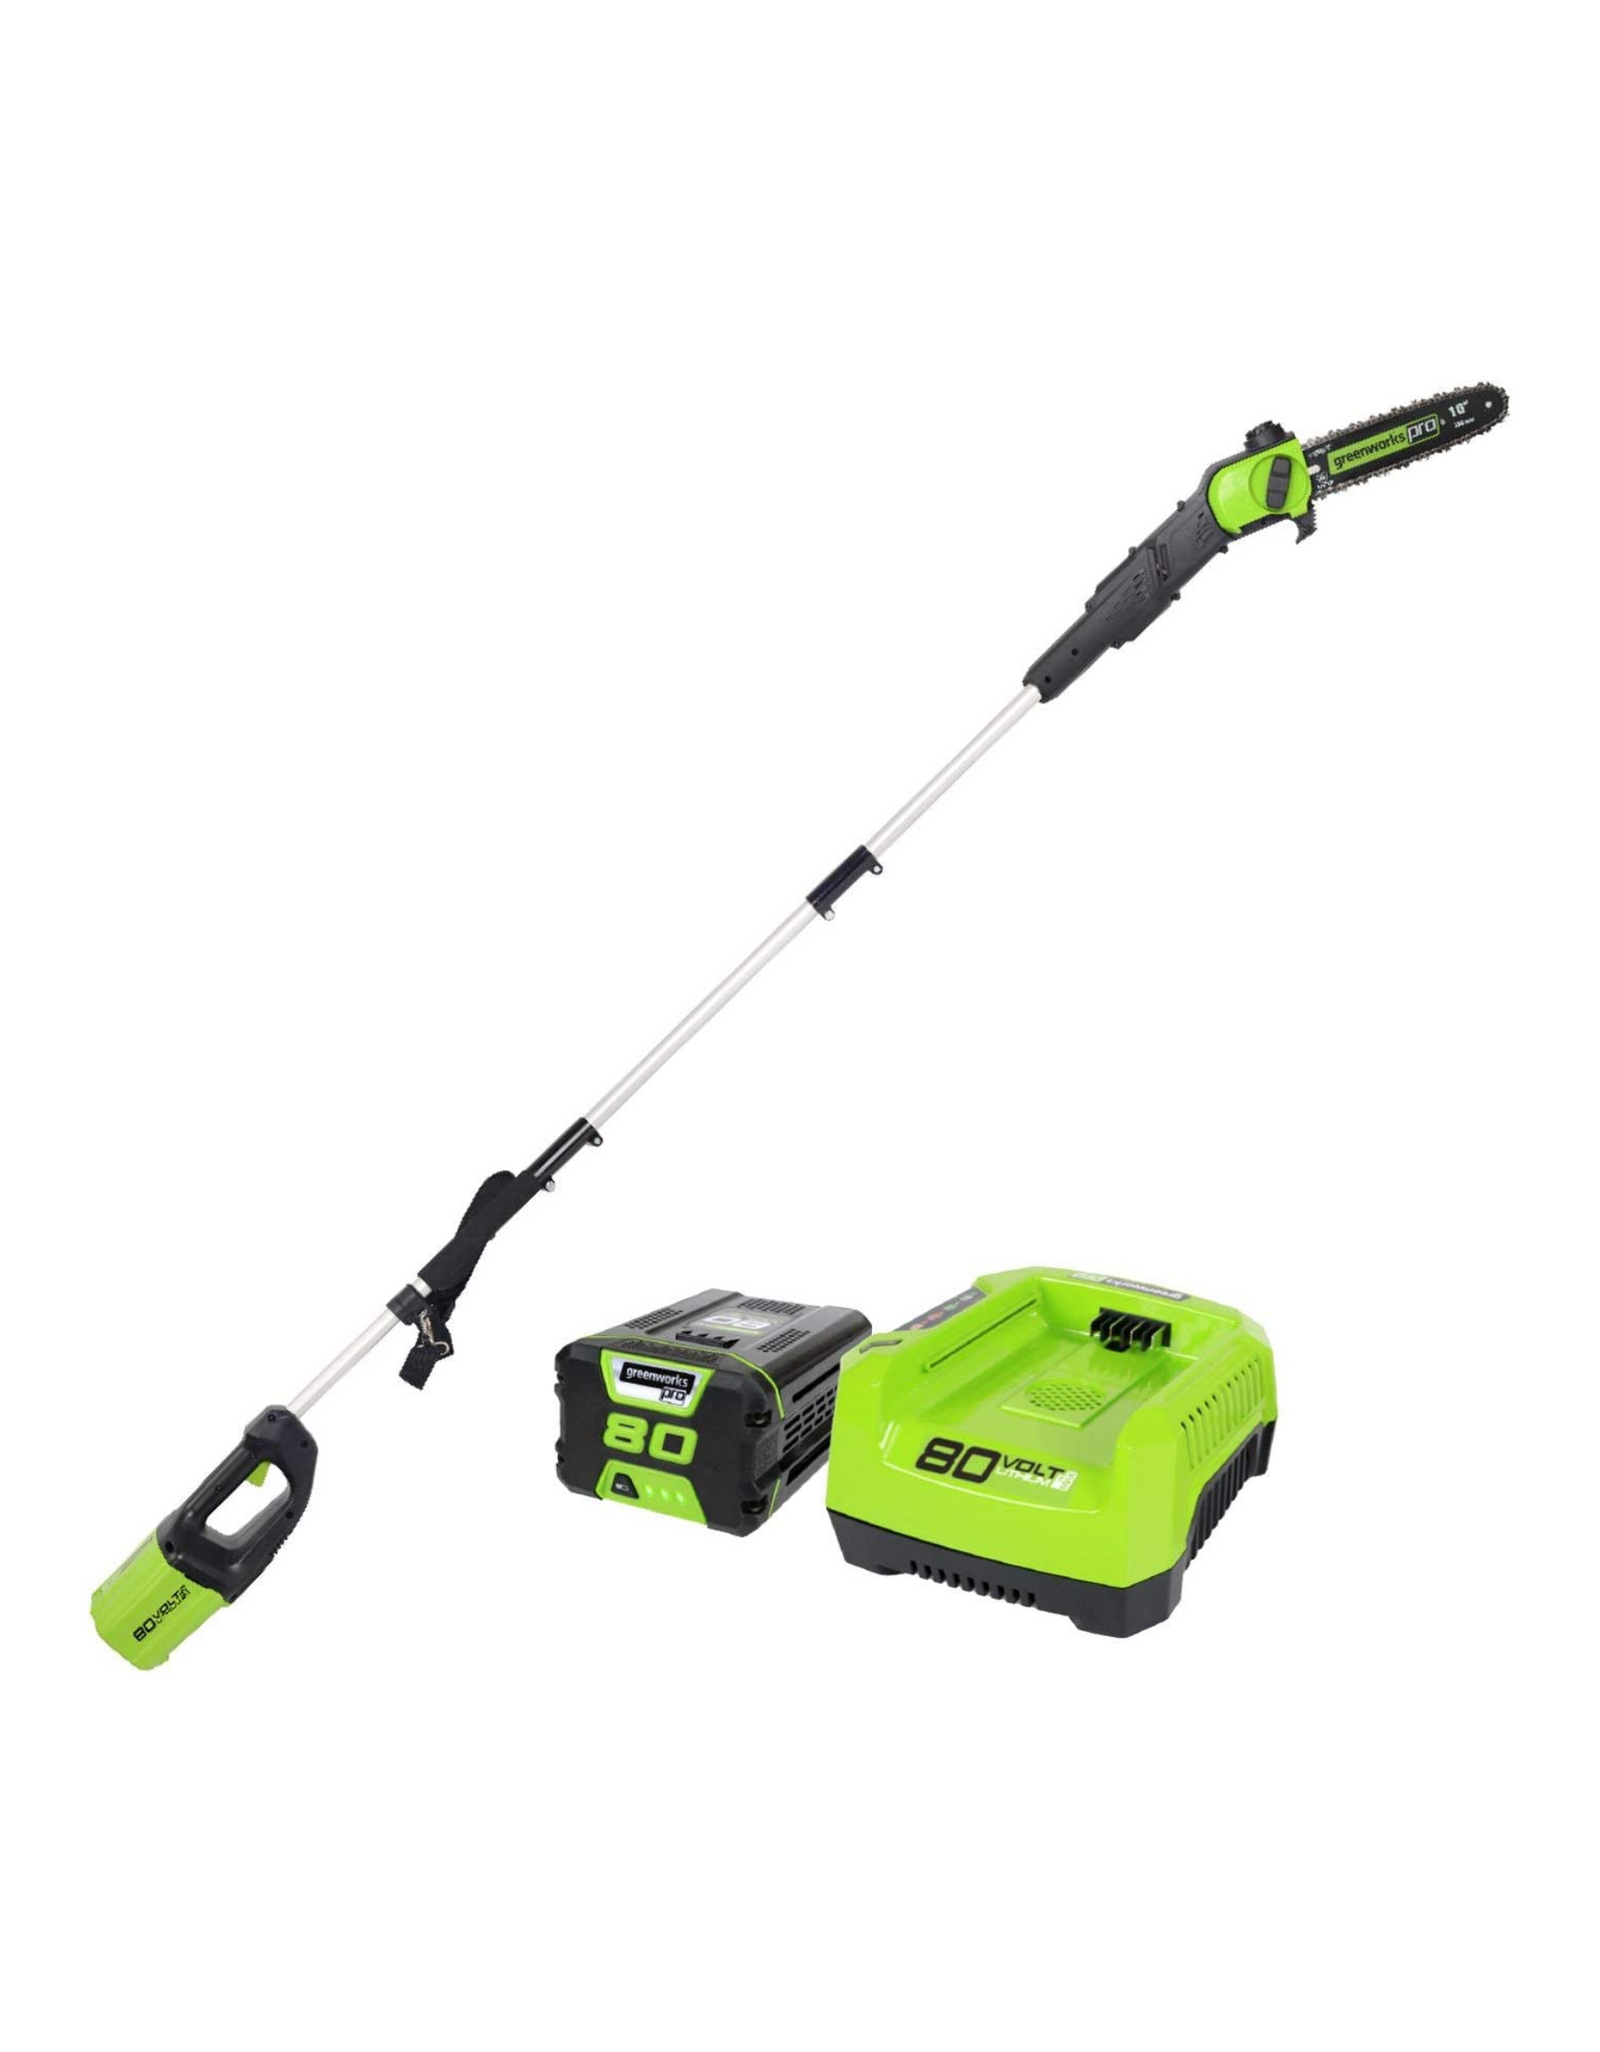 Greenworks Pro 80V 10 inch Brushless Cordless Polesaw PS80L210 - with Charger and 2Ah Battery